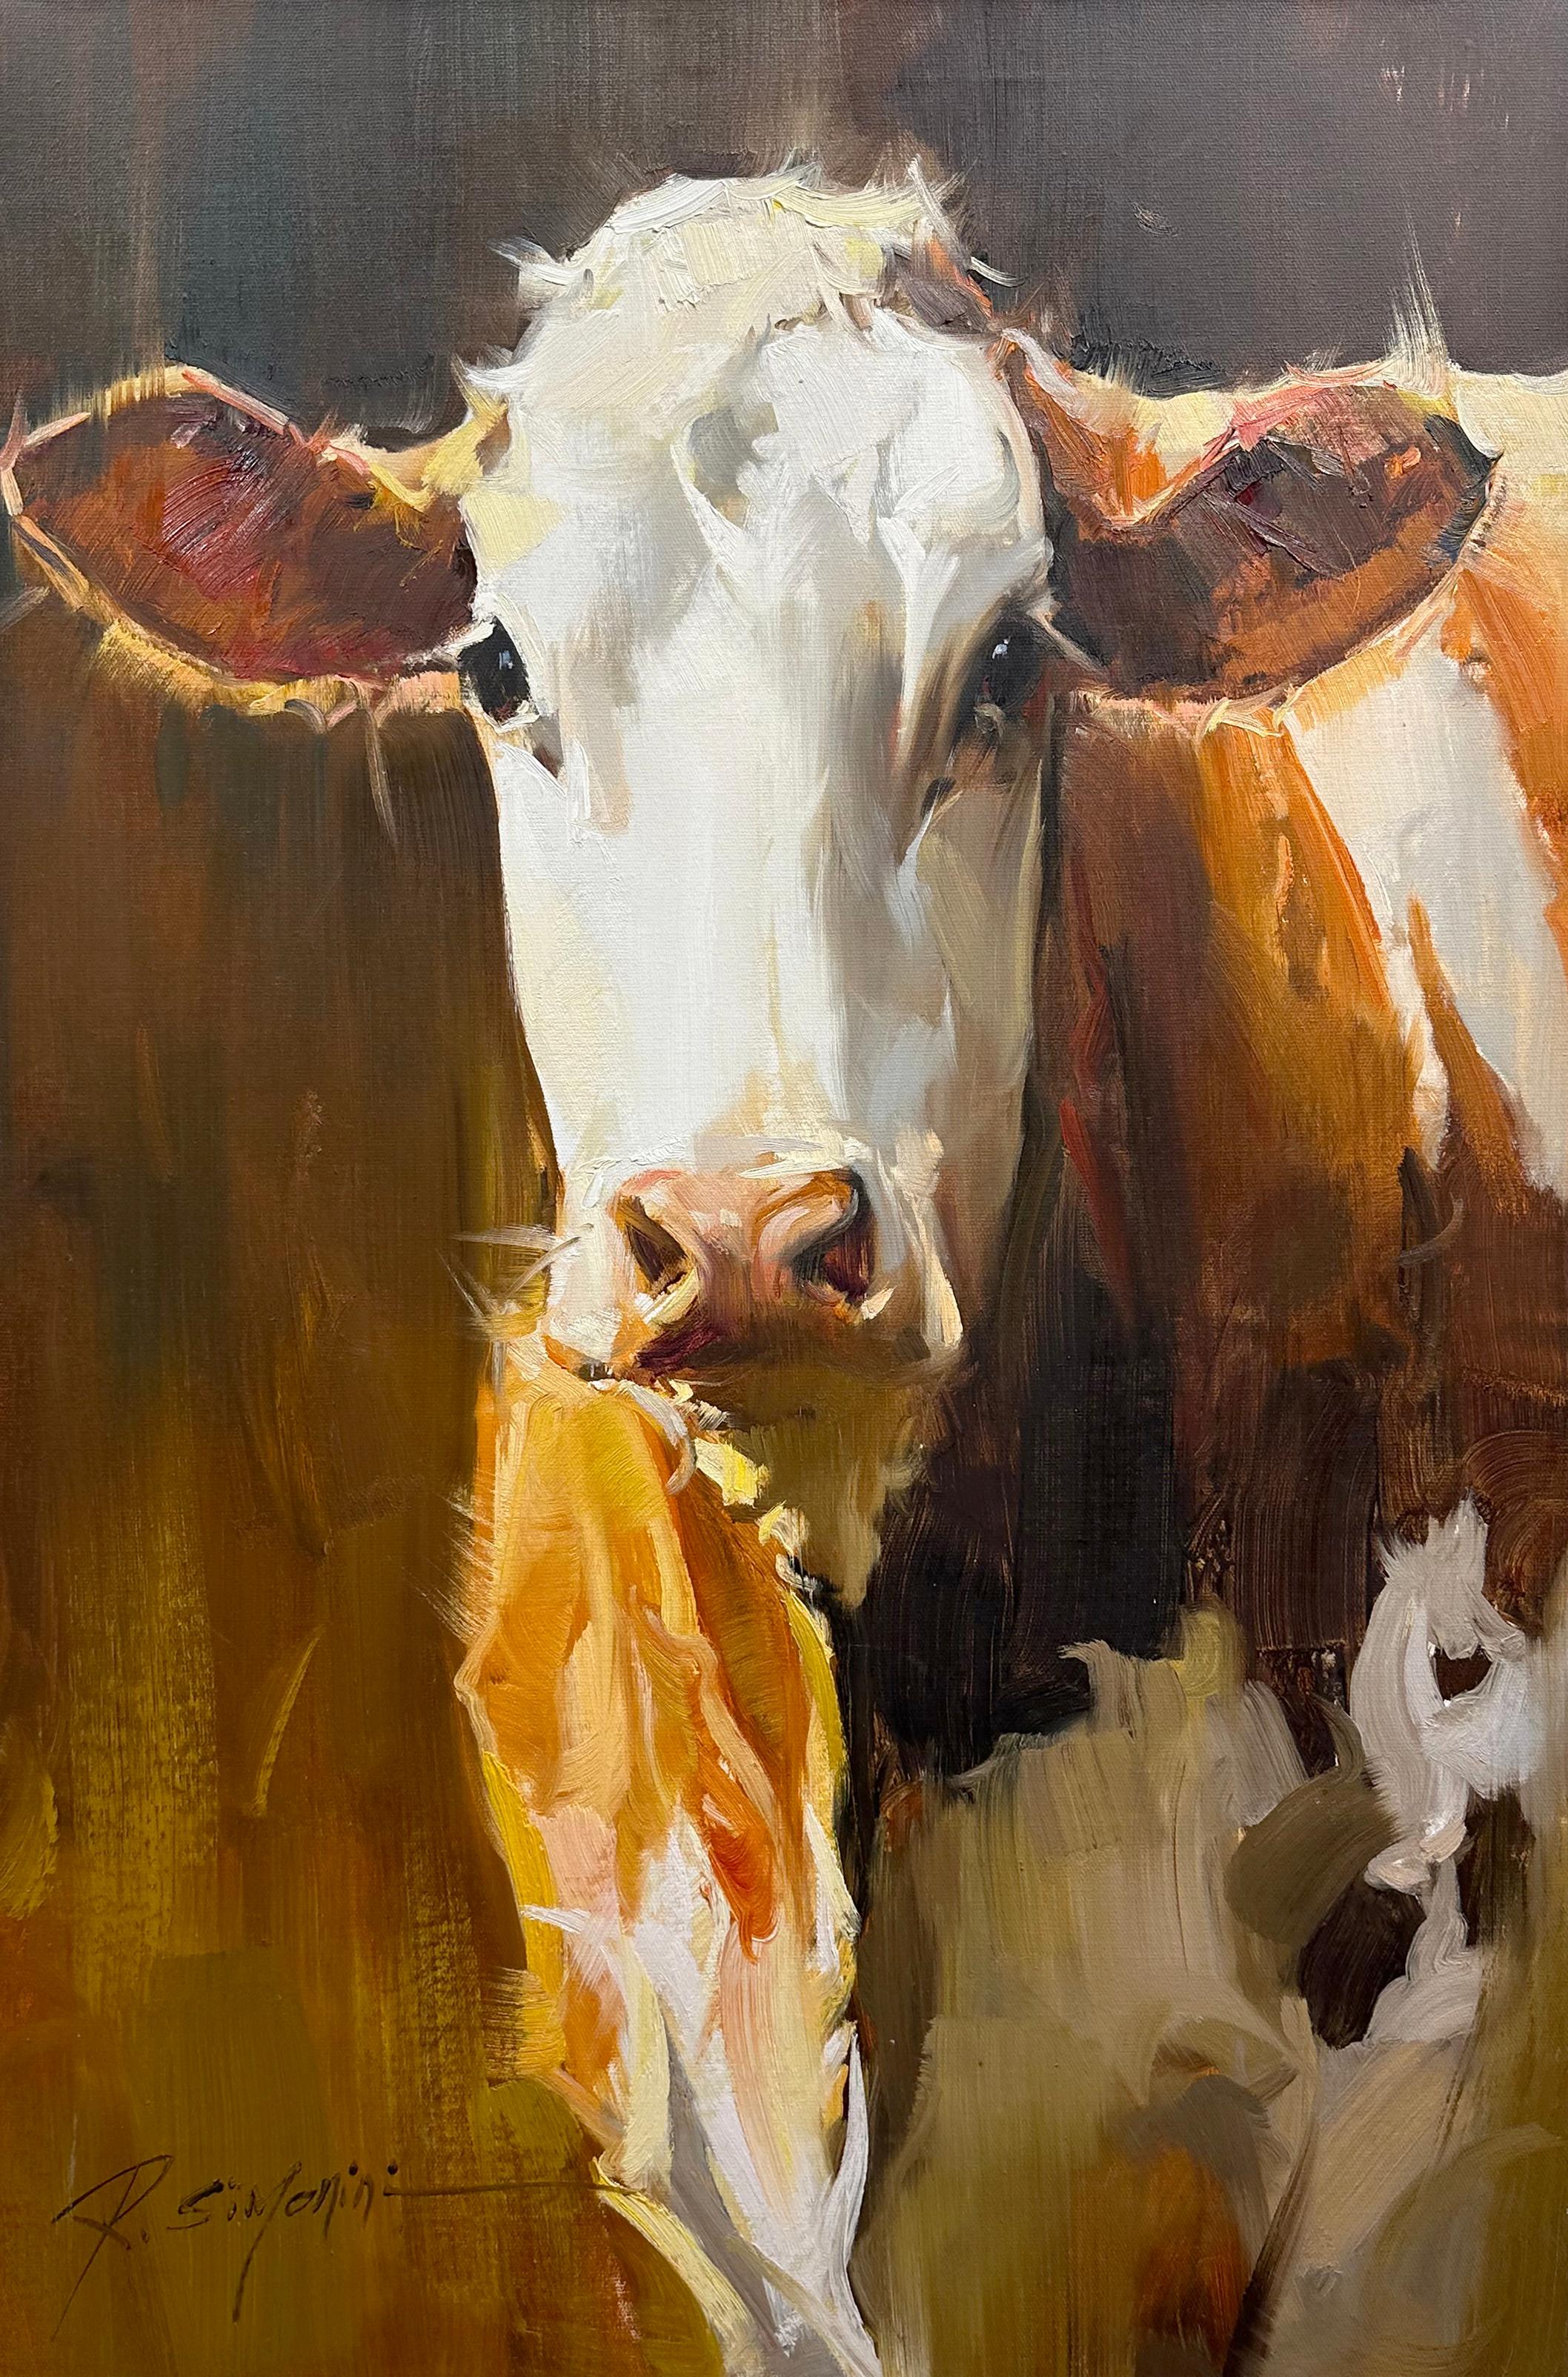 This painting by artist Ray Simonini titled "Savannah" is a 36x24 farm animal oil painting on canvas featuring a portrait of a brown and white spotted cow against a dark background. 

About the artist:
Simonini was born in China in 1981. He became